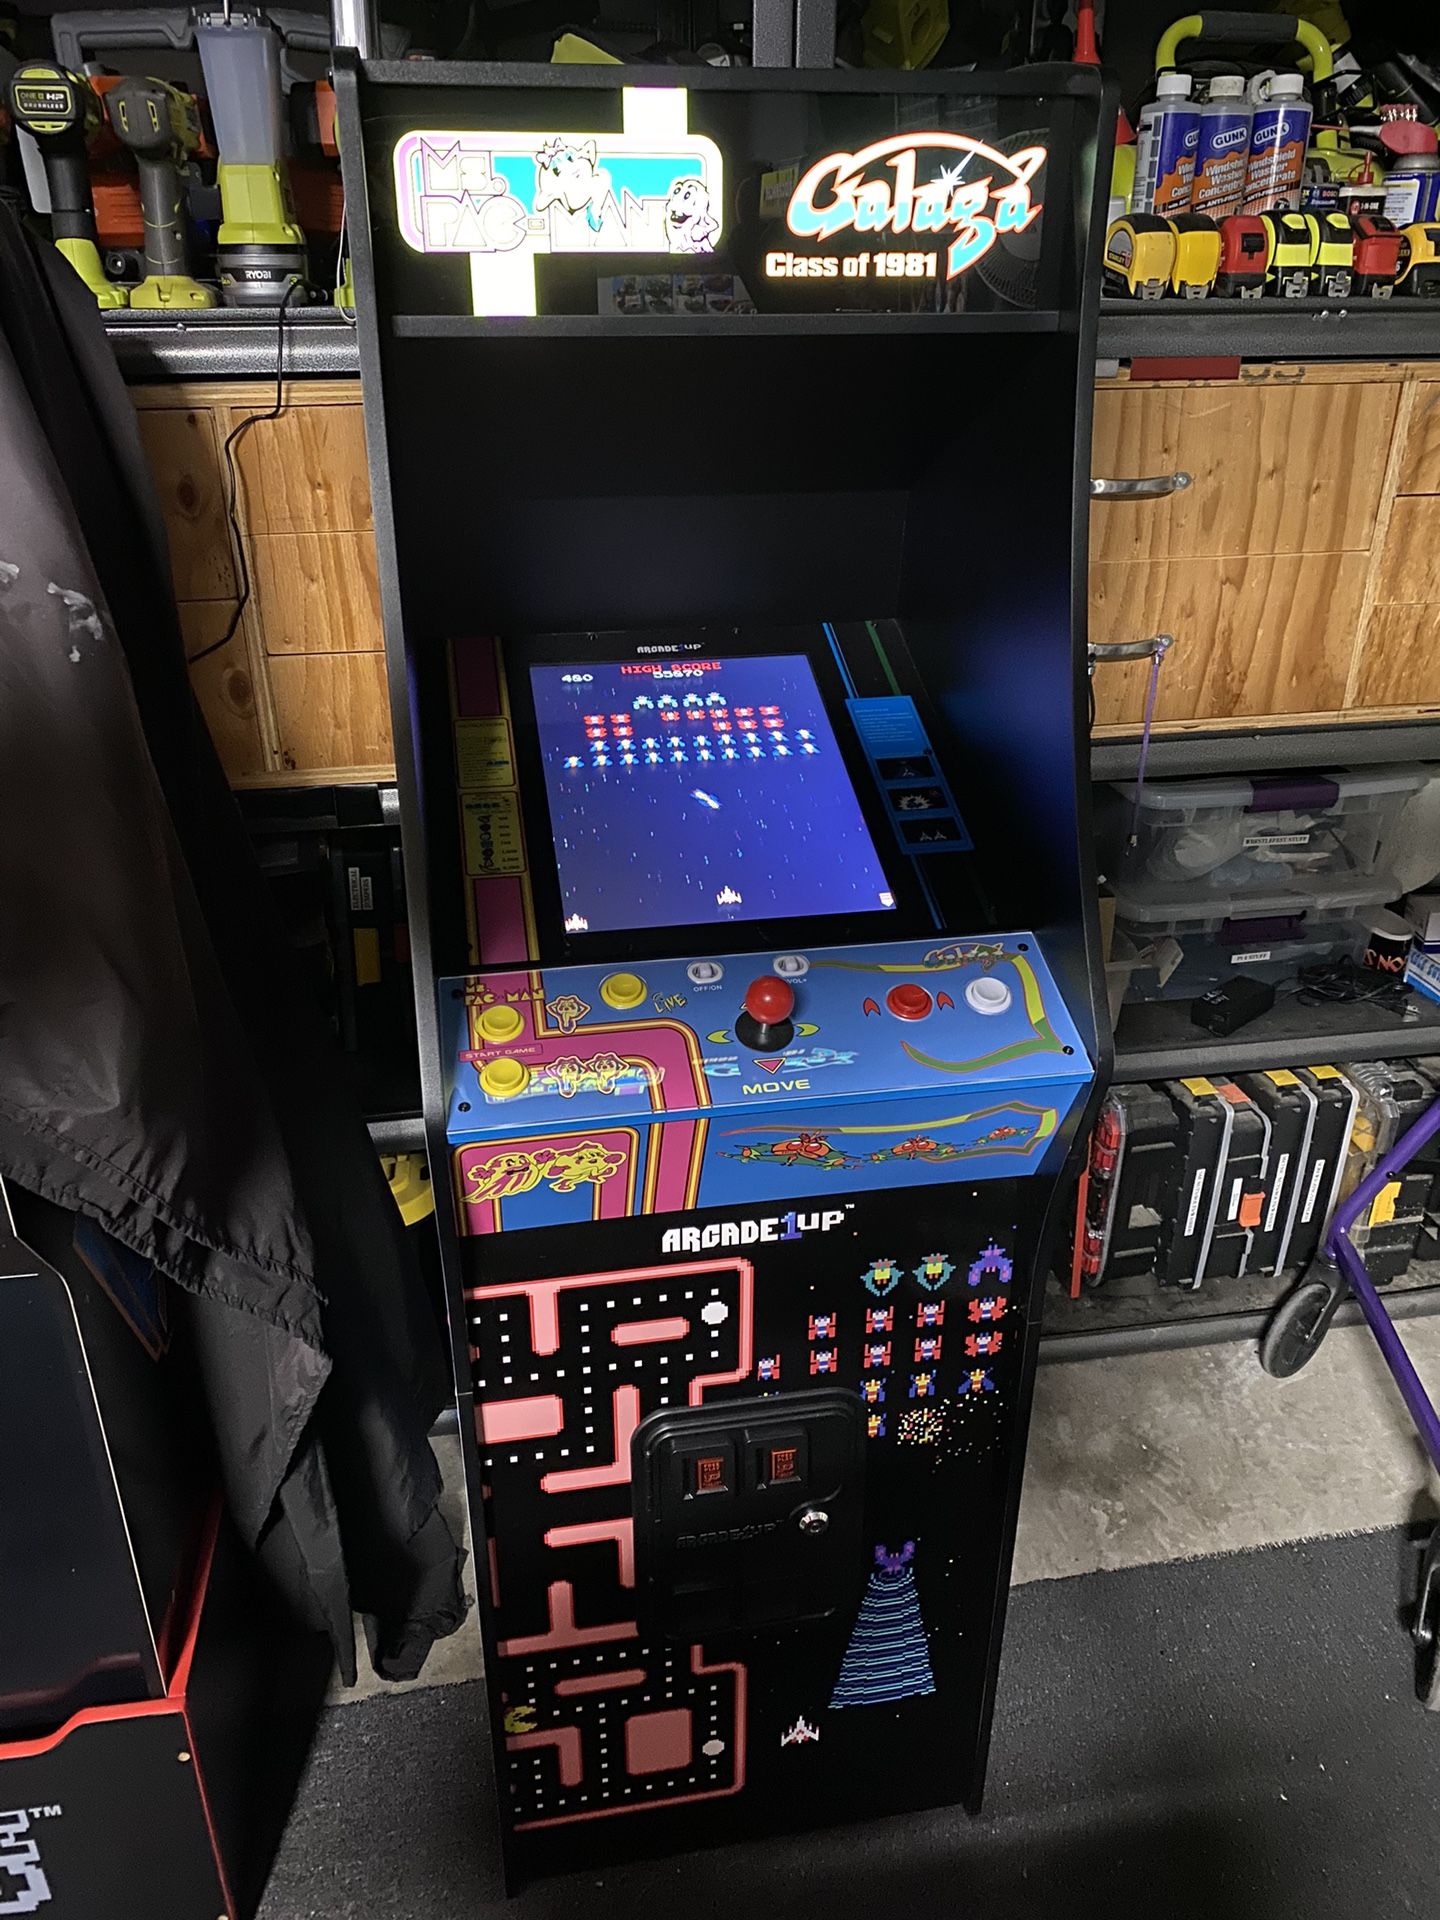 Arcade1up Class of '81 Deluxe Arcade Game Ms Pac-Man/Galaga